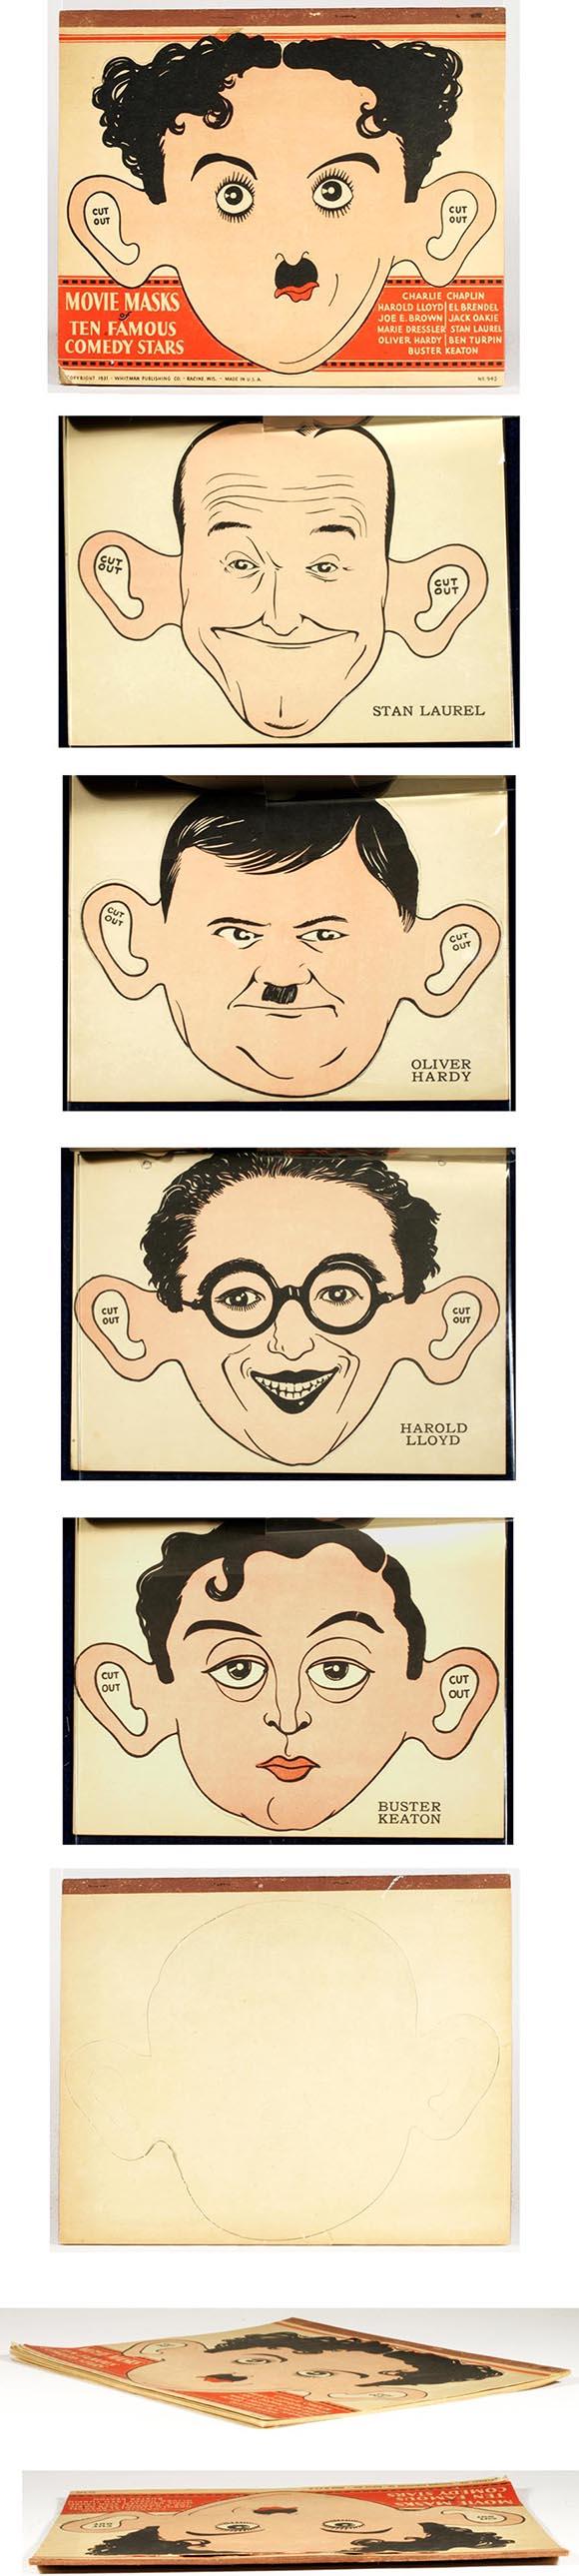 1931 Whitman, Movie Masks of 10 Famous Comedy Stars